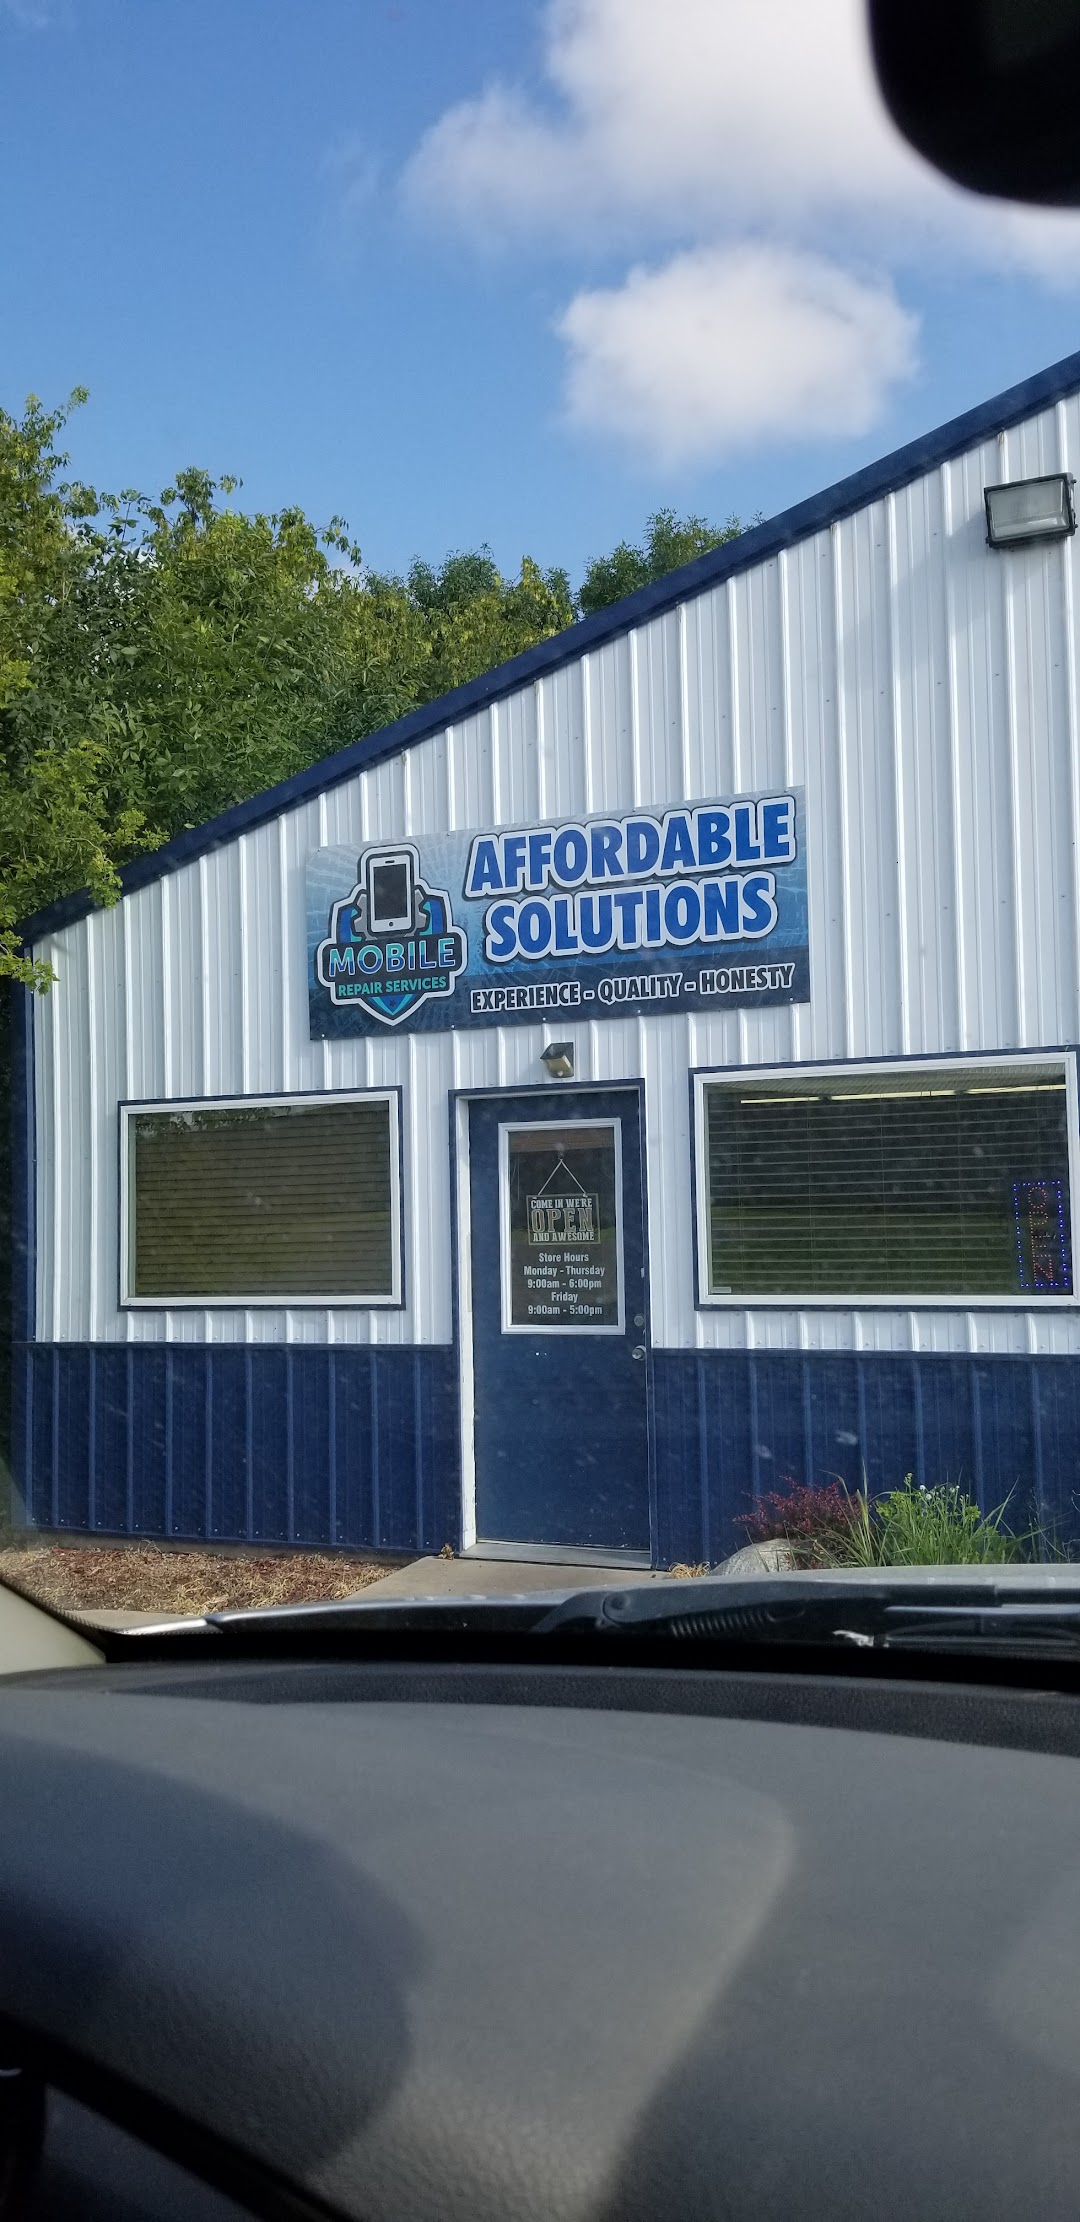 Affordable Solutions